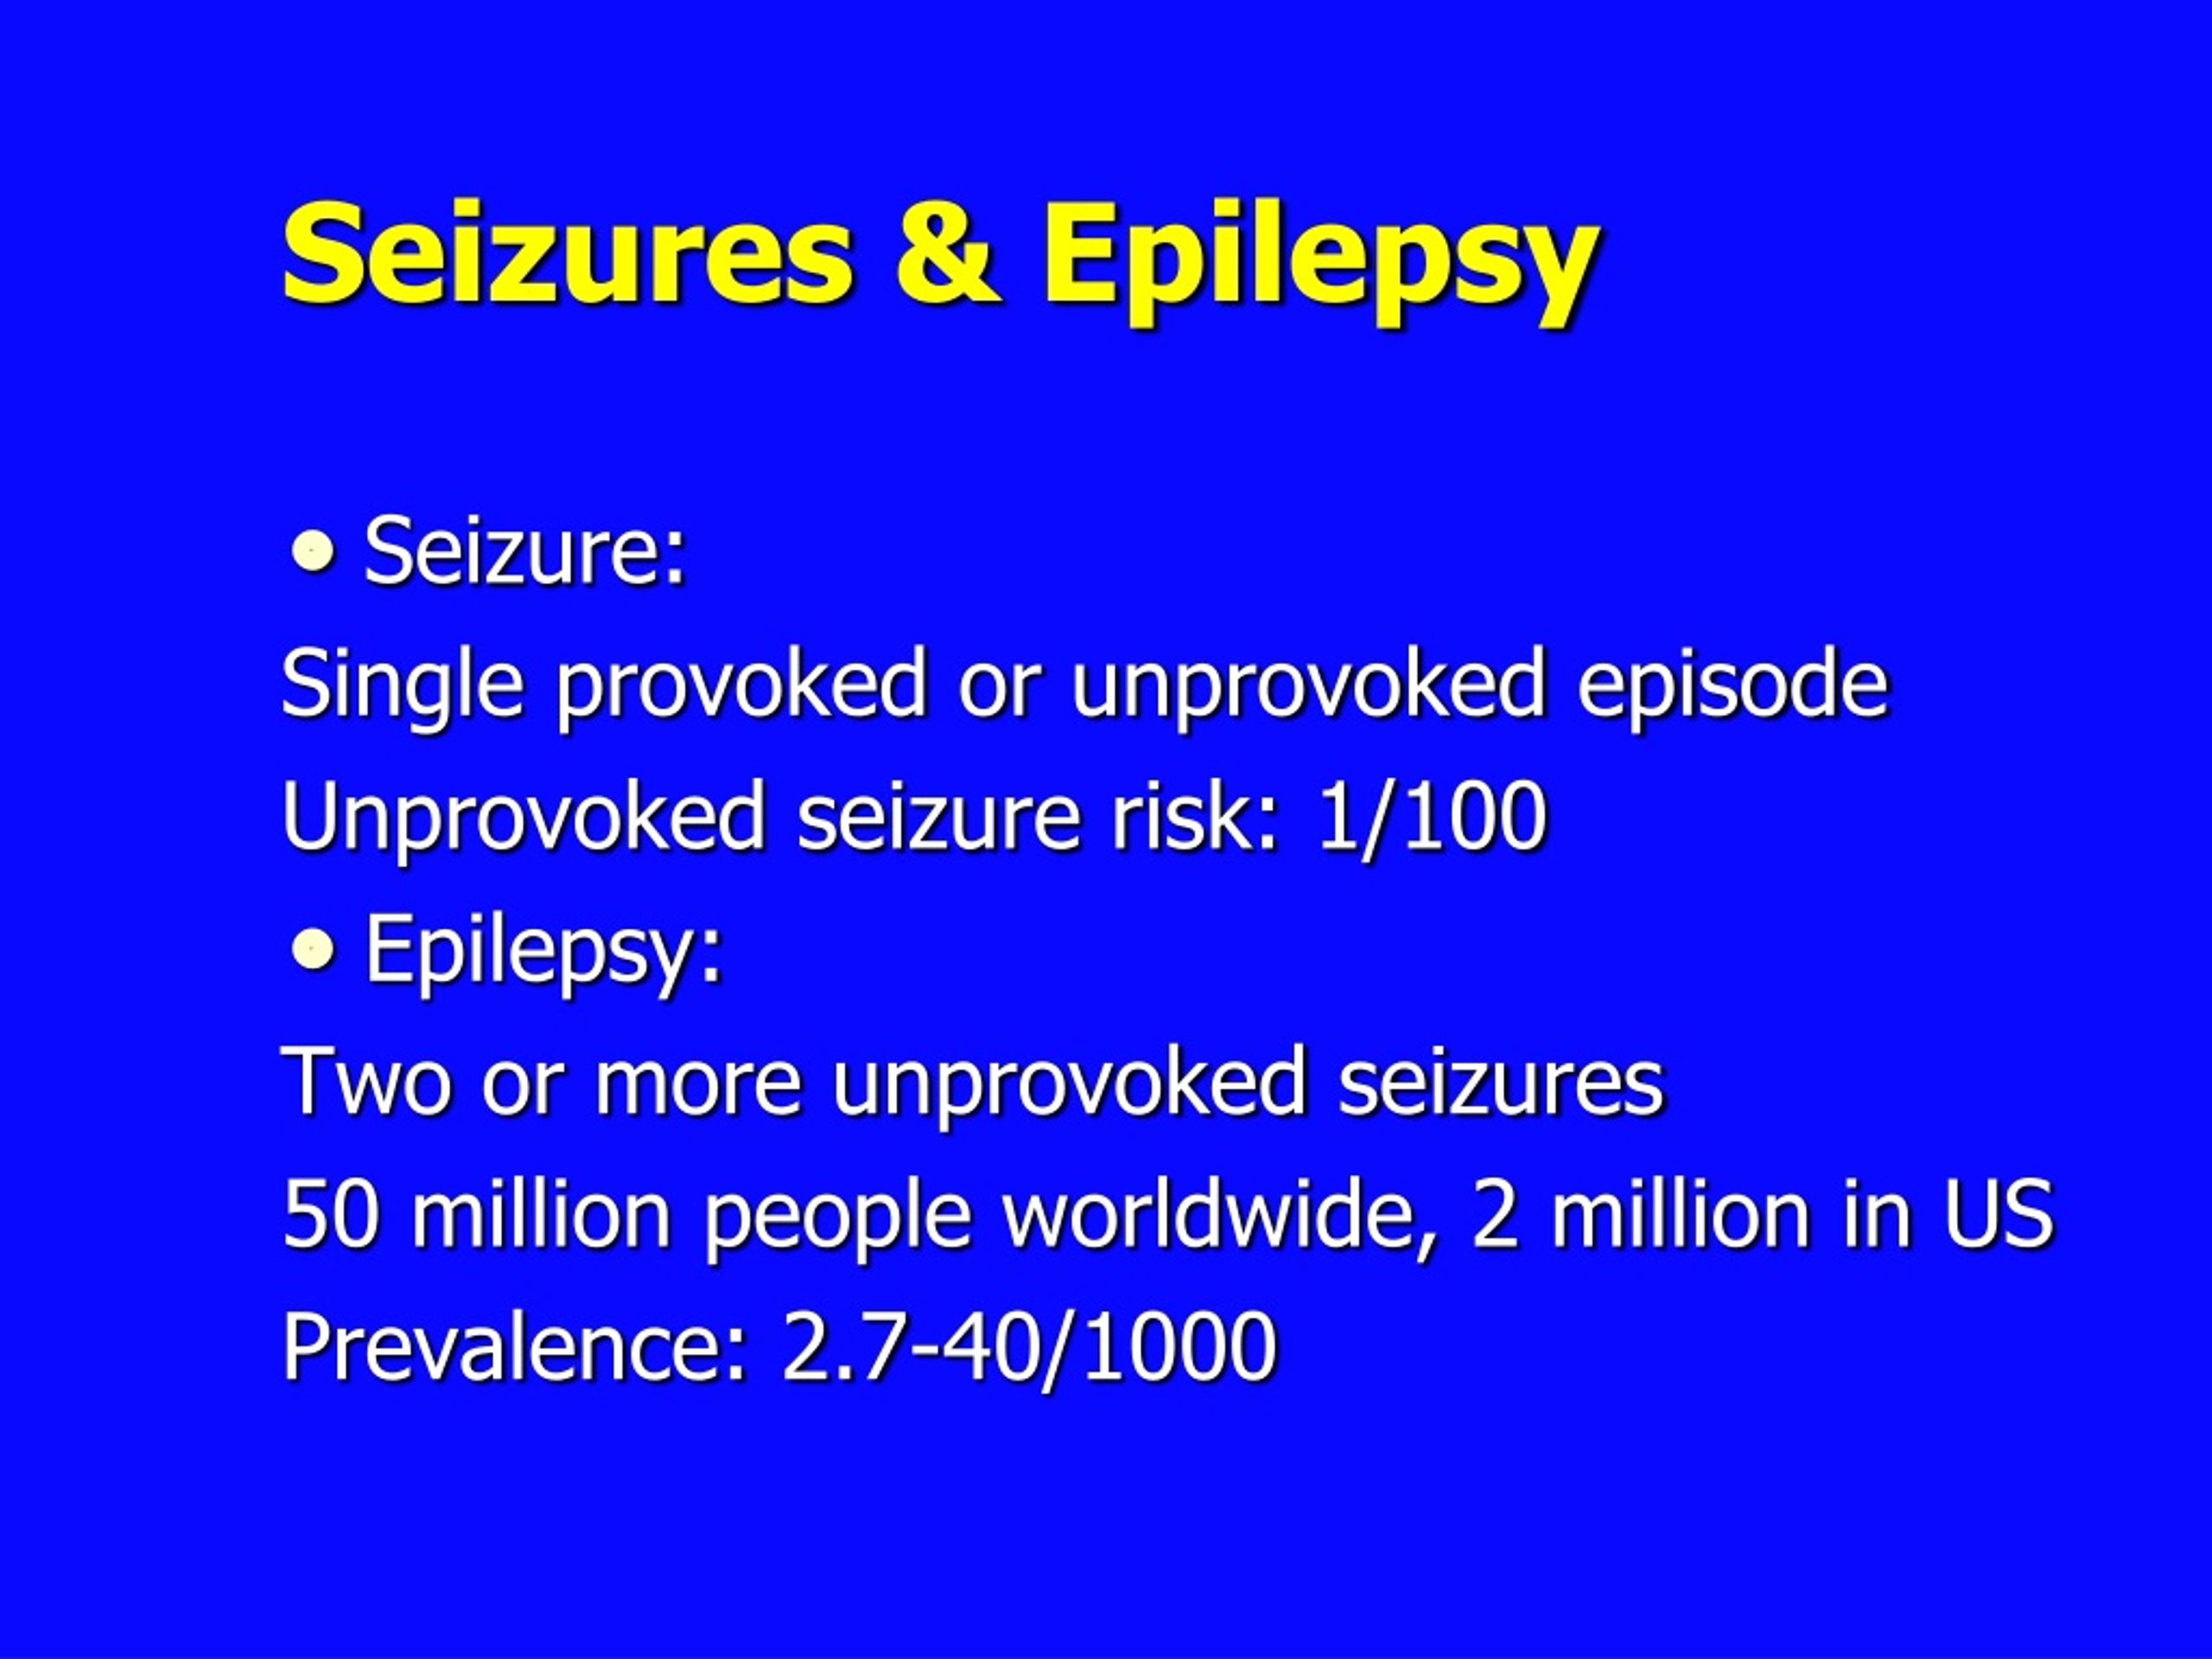 PPT - Recent Advances in the Diagnosis and Treatment of Epilepsy ...